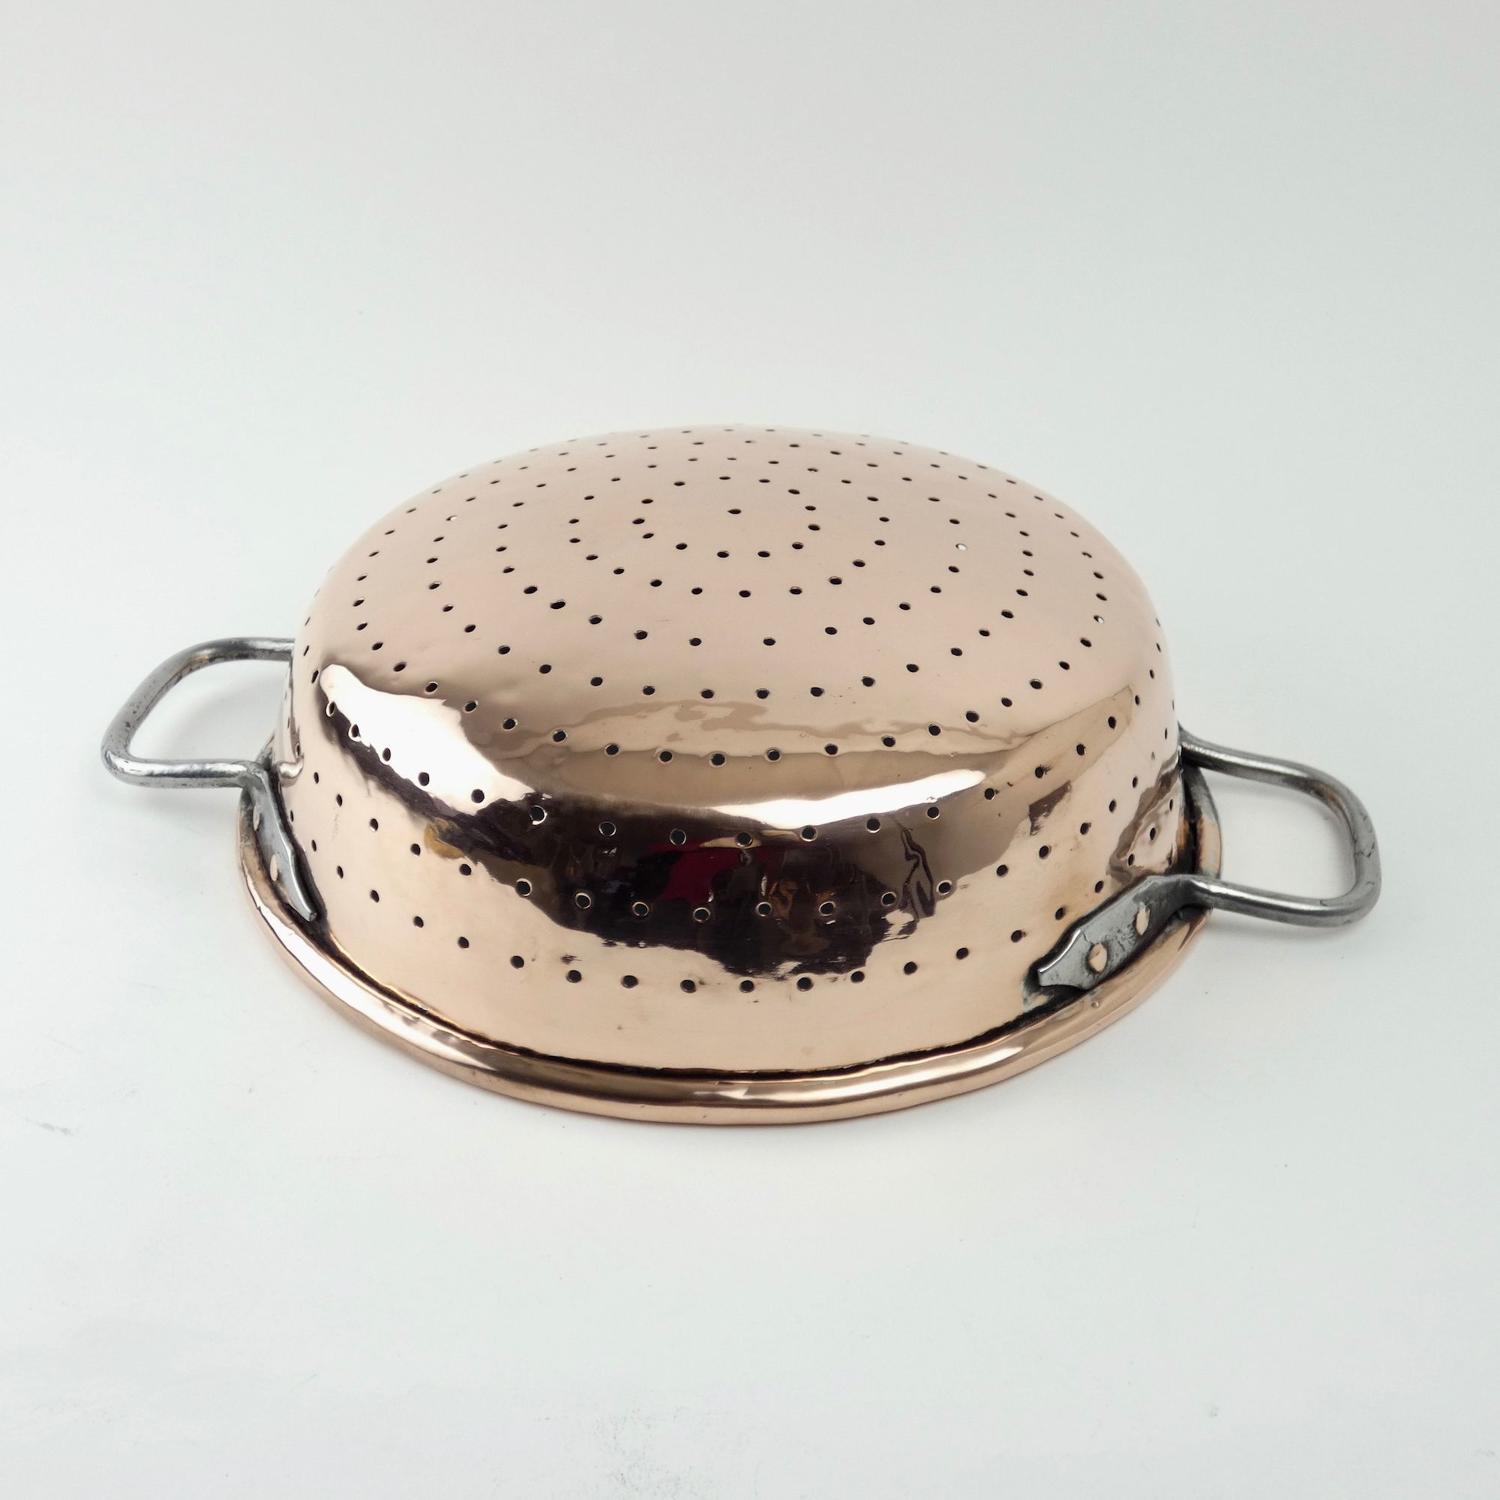 Early 19th century colander